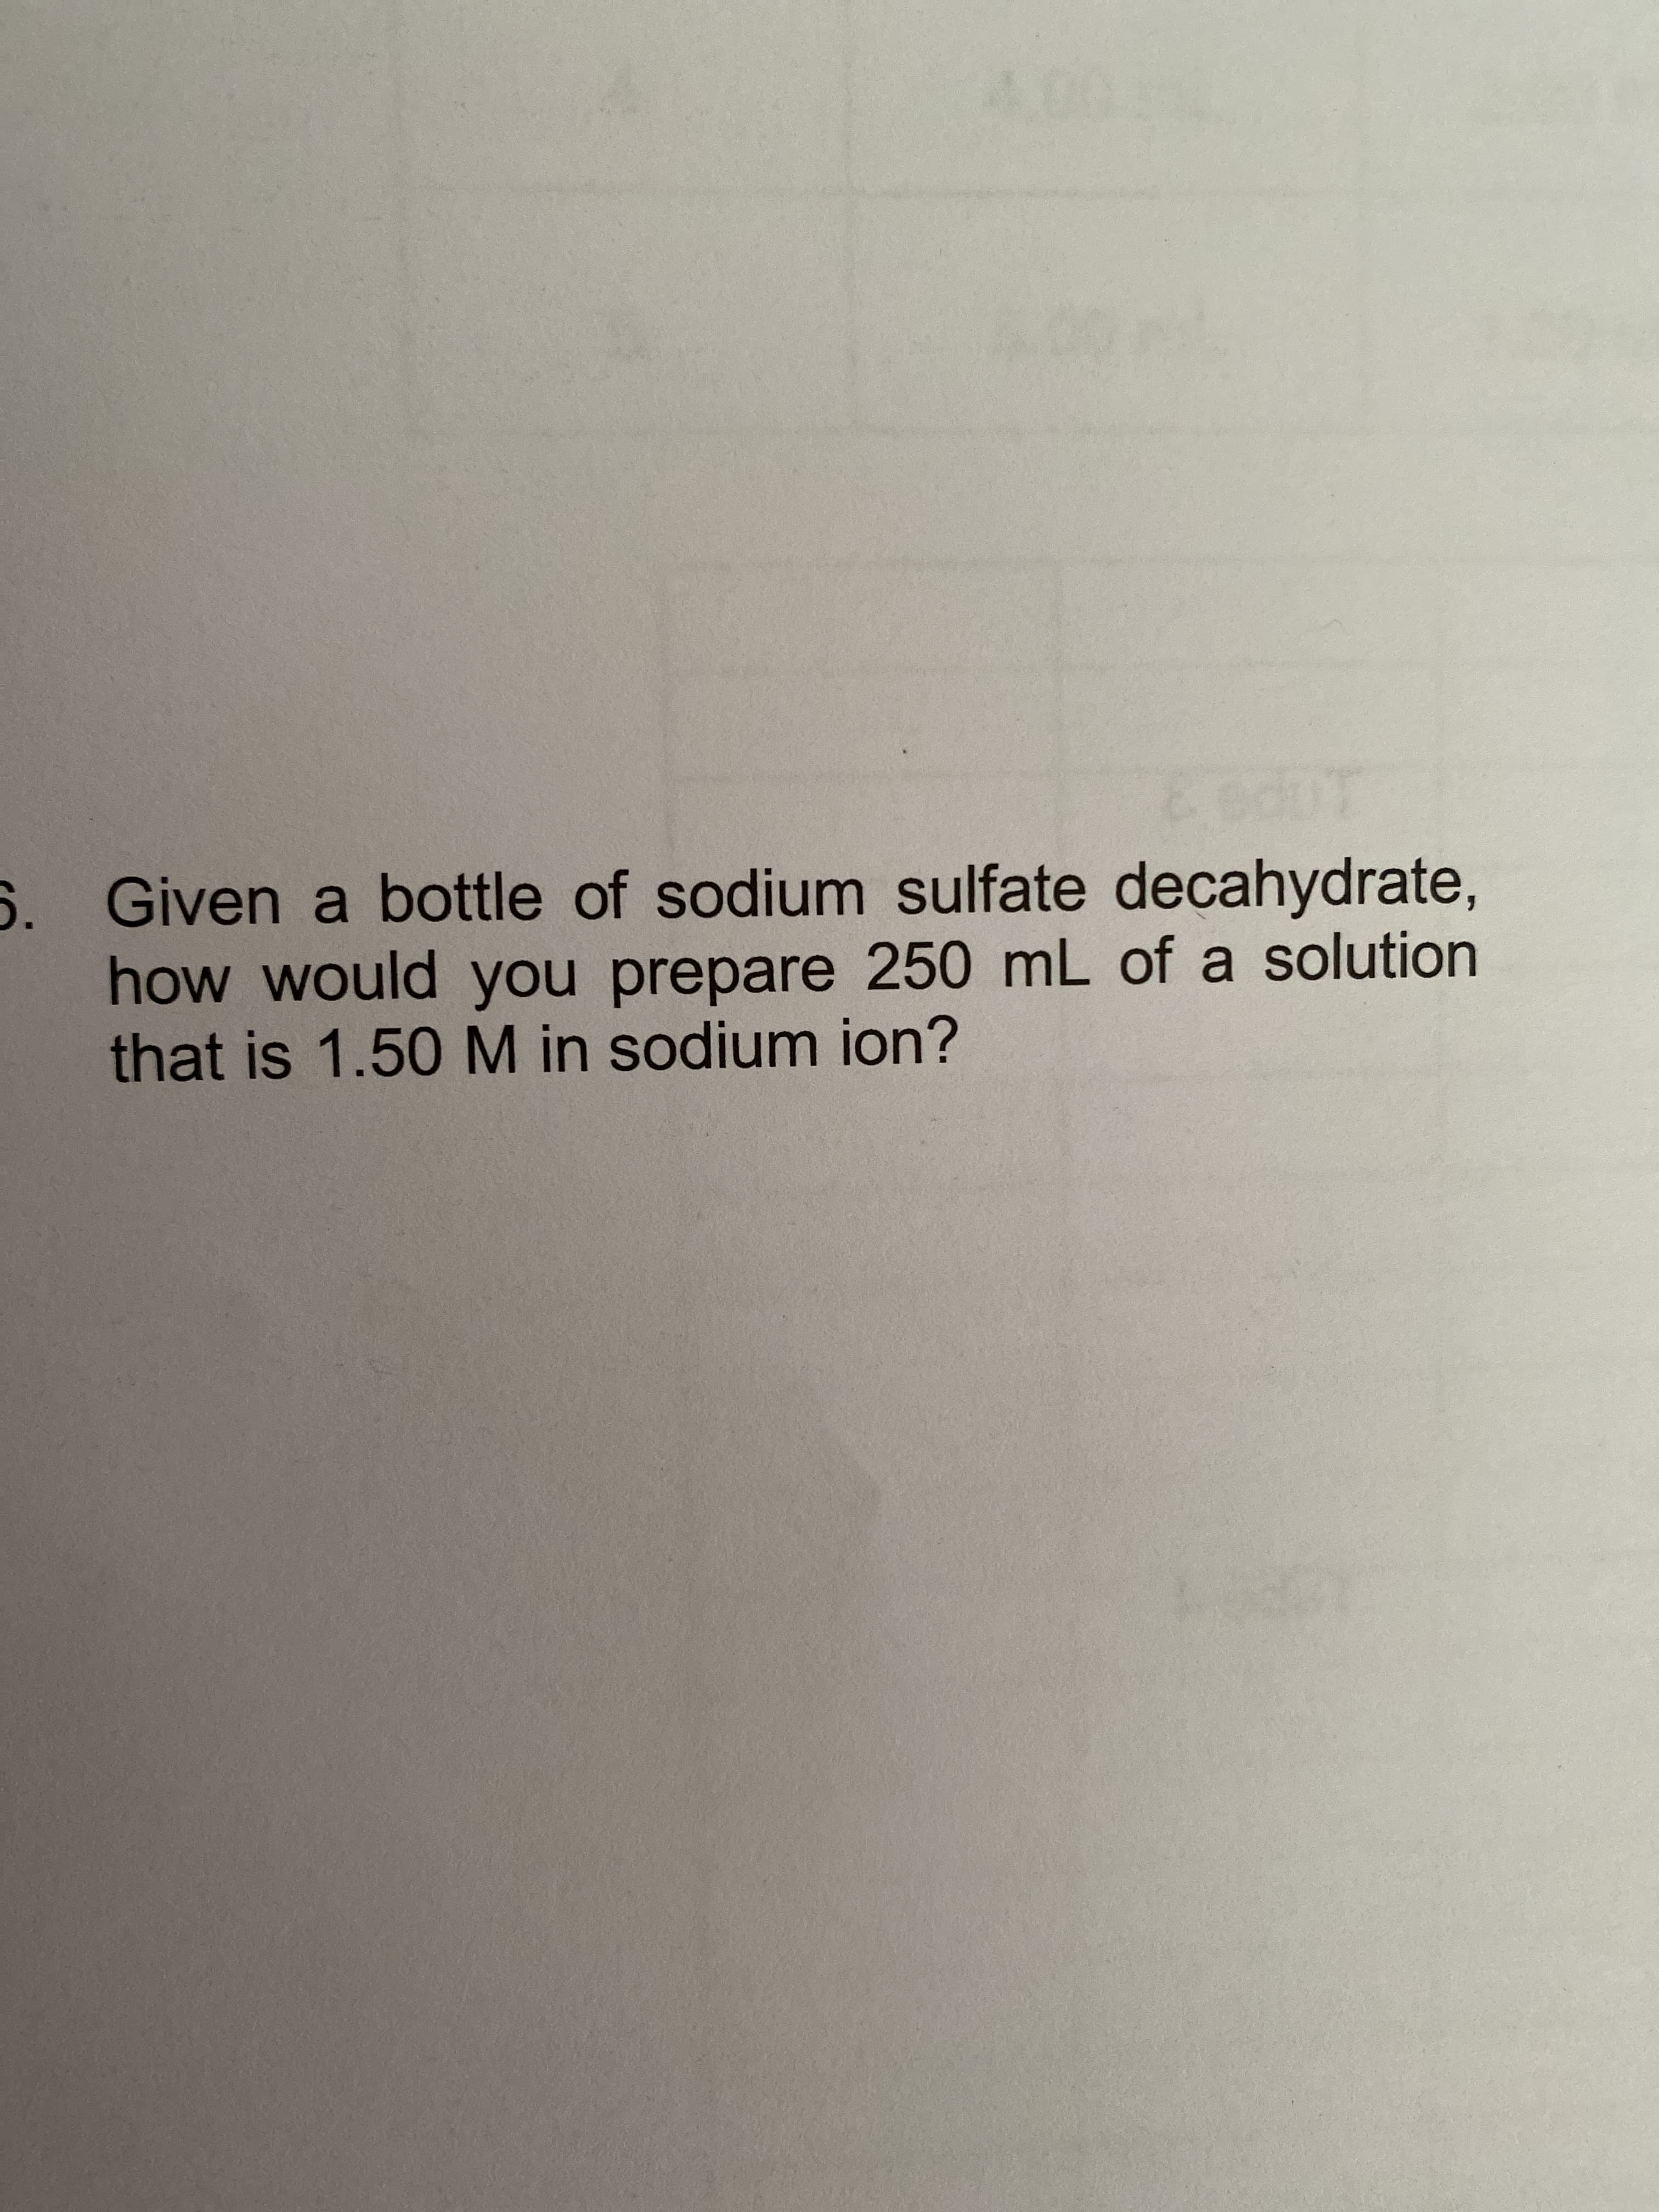 6. Given a bottle of sodium sulfate decahydrate,
how would you prepare 250 mL of a solution
that is 1.50M in sodium ion?
